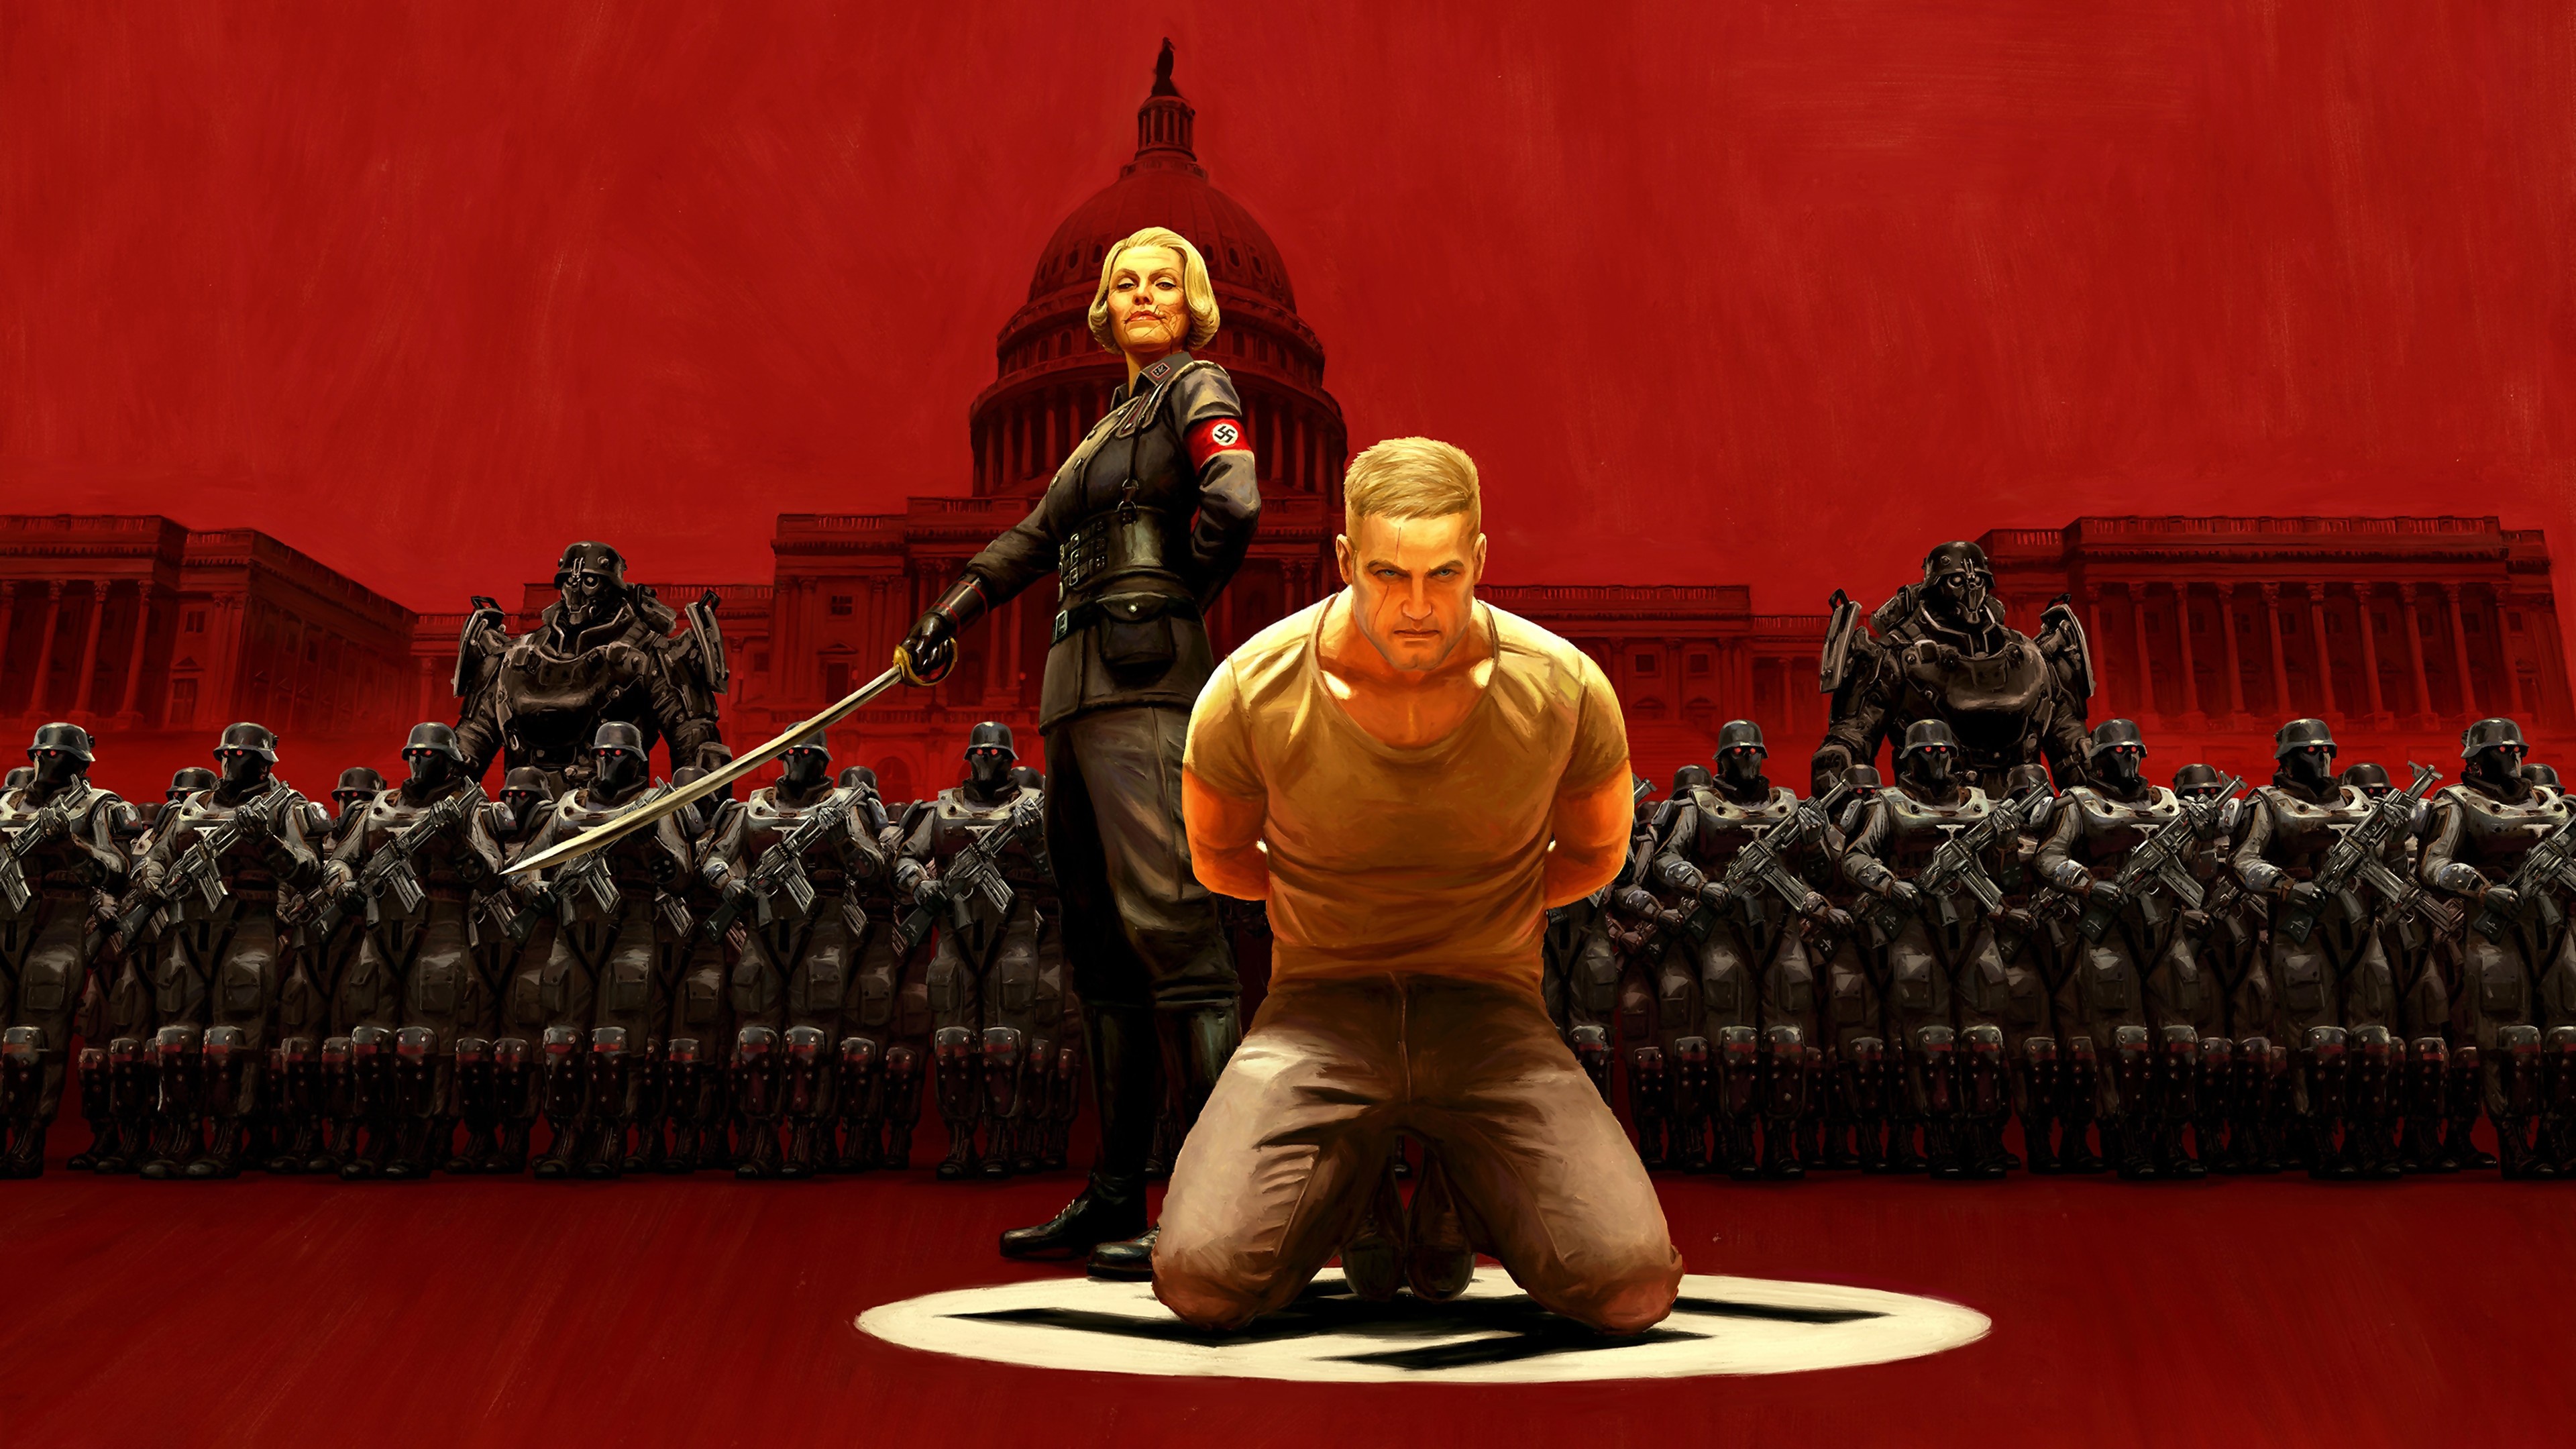 Wolfenstein ii the new colossus hd papers and backgrounds